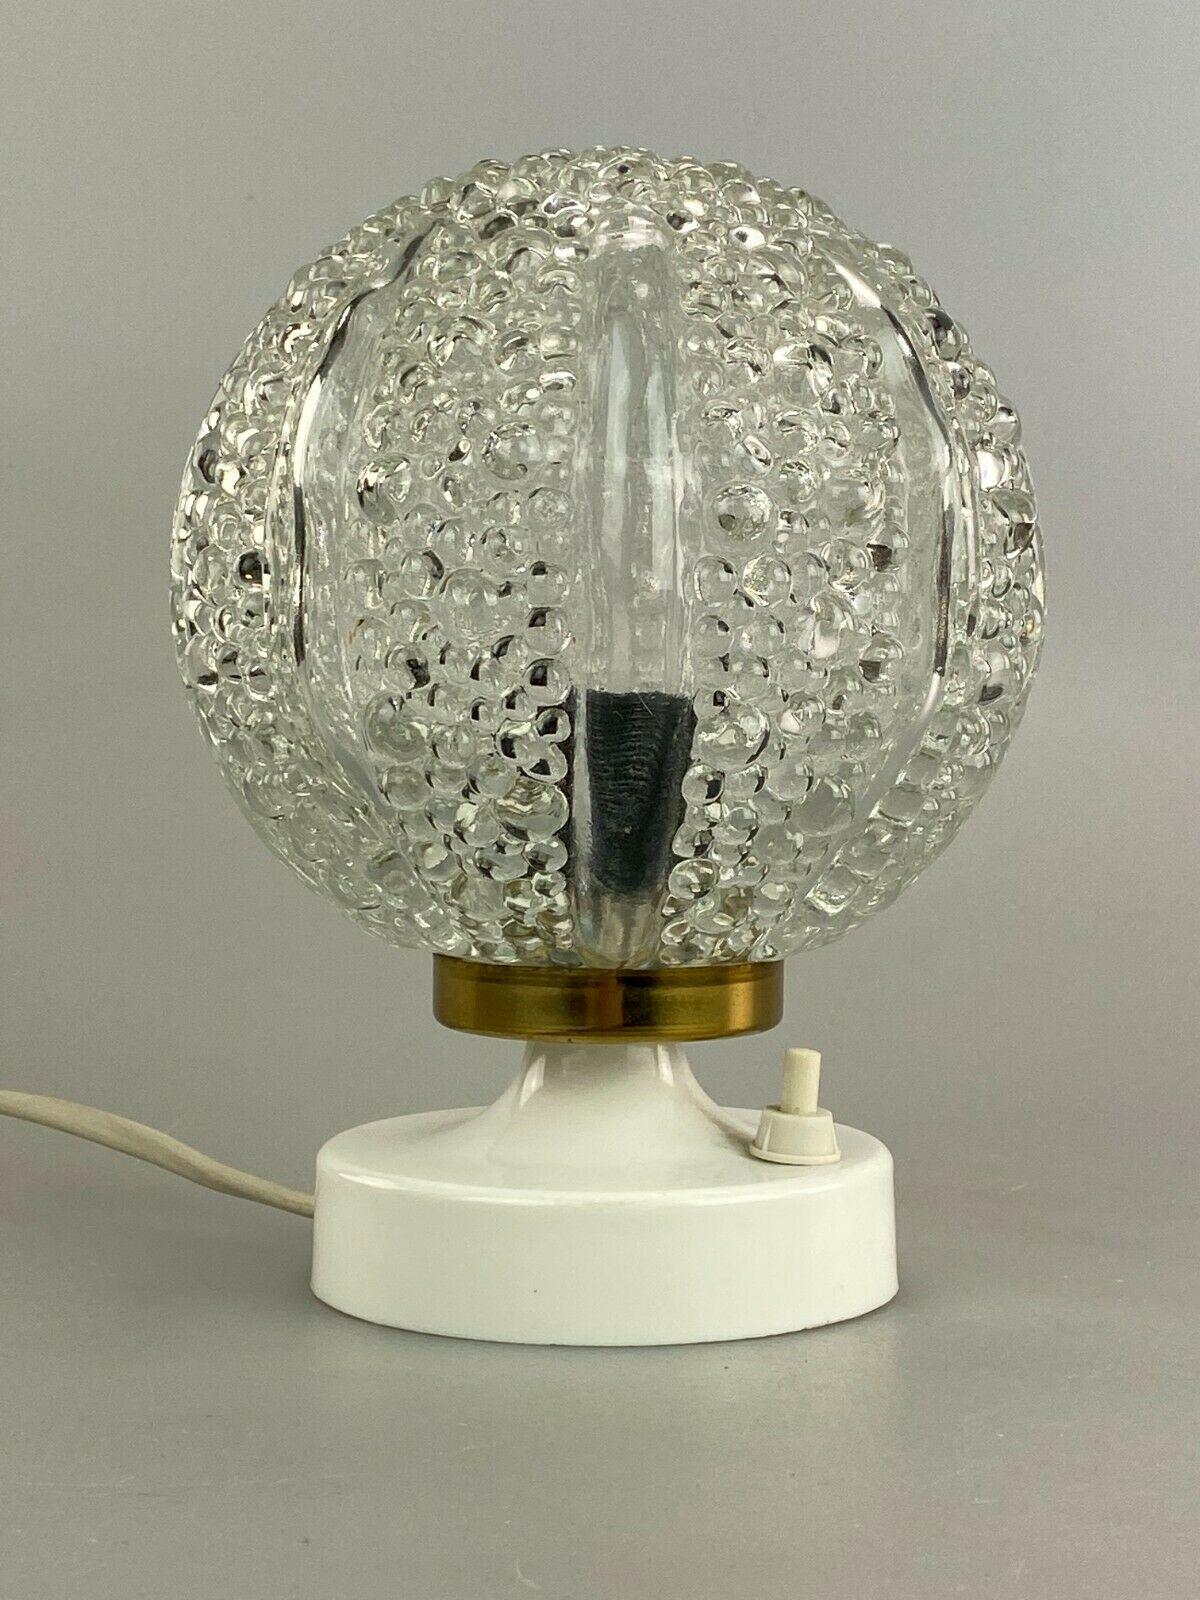 60s 70s ball lamp light table lamp bedside lamp space age design

Object: spherical lamp

Manufacturer:

Condition: good

Age: around 1960-1970

Dimensions:

Diameter = 14cm
Height = 18cm

Other notes:

The pictures serve as part of